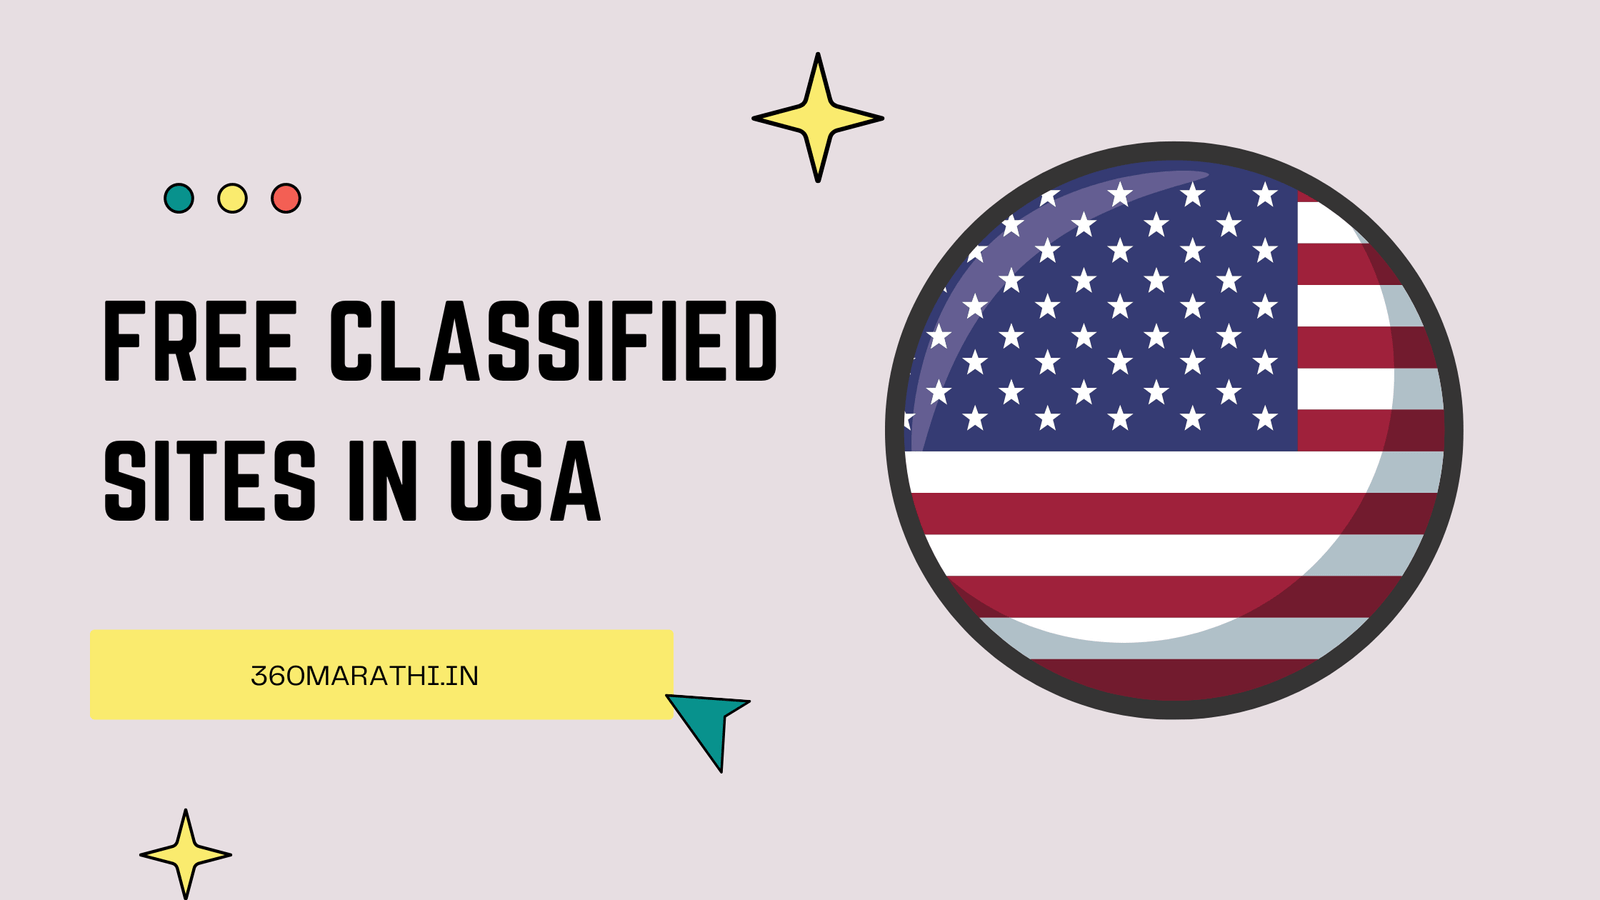 Free Classified Sites in USA